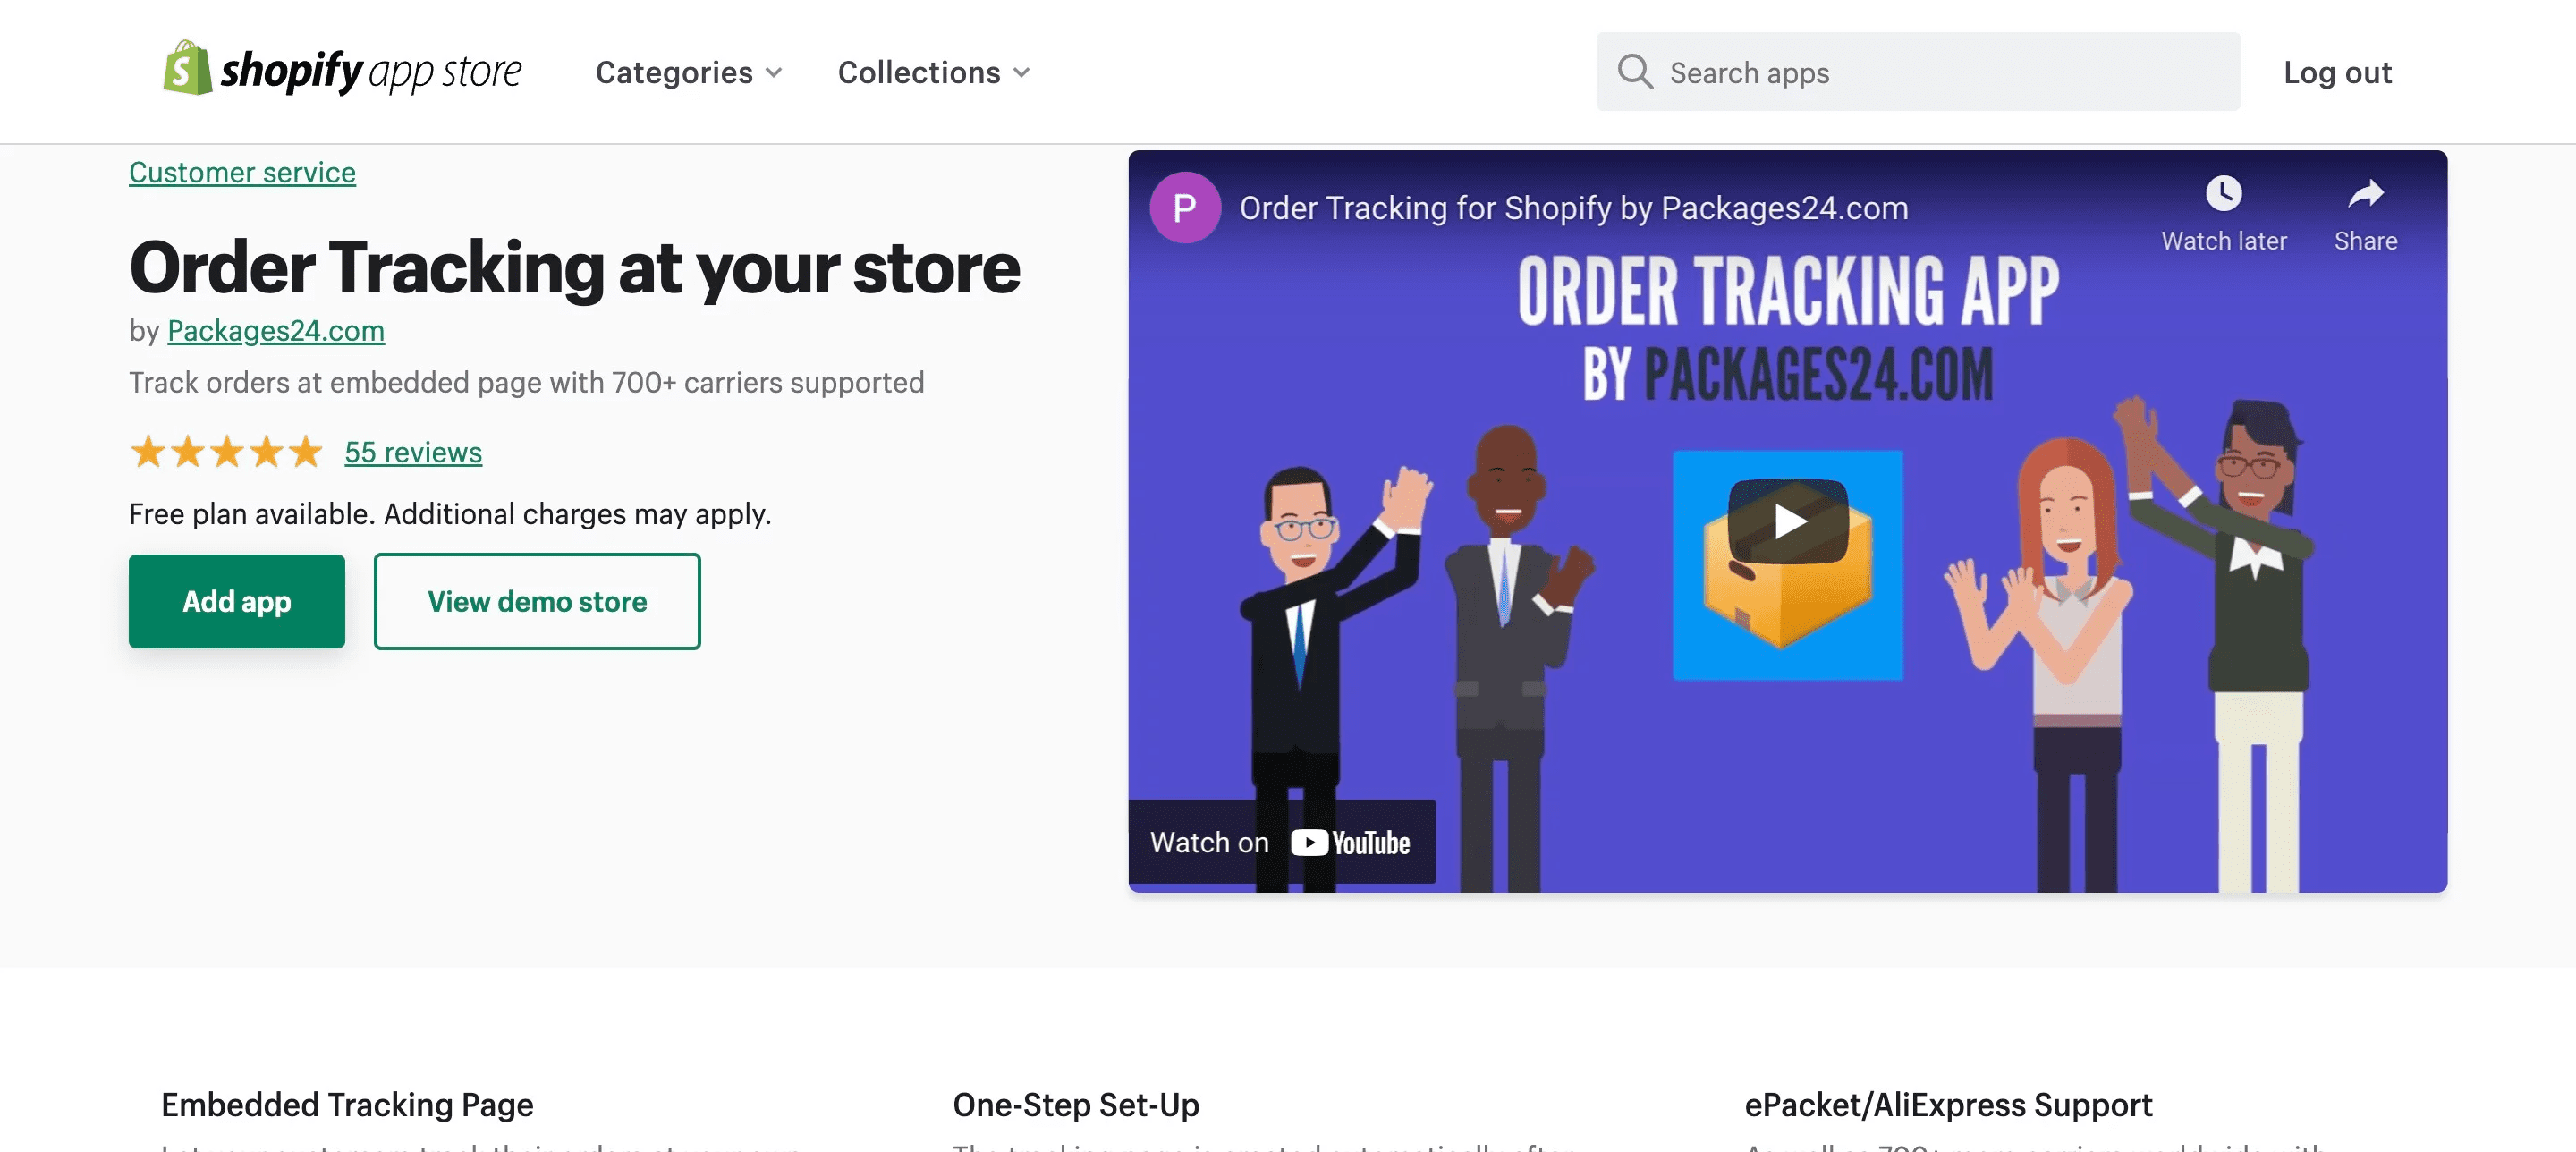 Order Tracking at your store